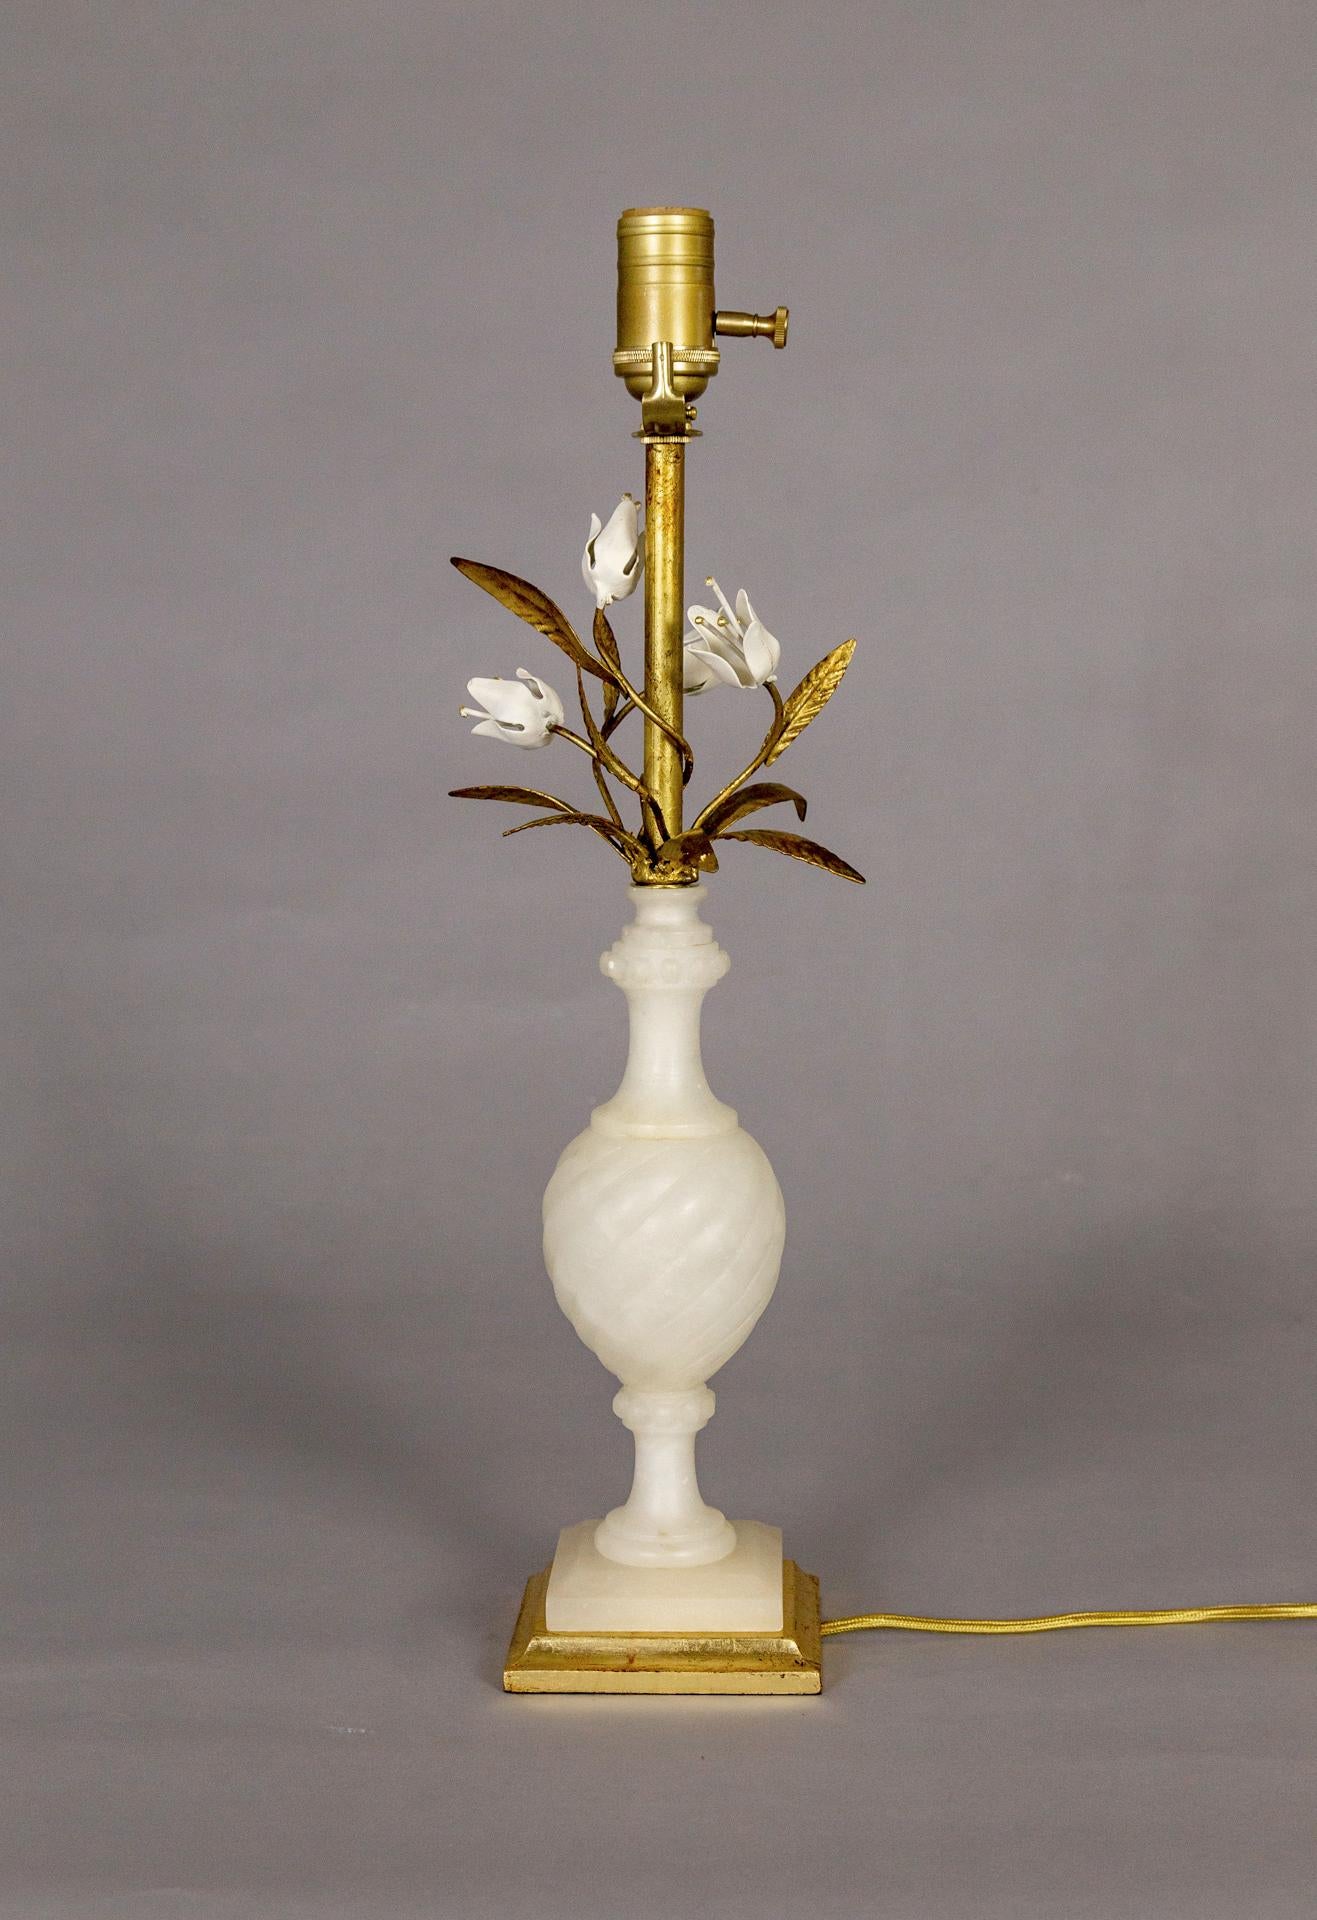 A newly restored table lamp of carved alabaster topped with white painted flowers and gilded metal leaves around the brass stem. It sits on a gilded, wood base. The stone is carved in a baluster shape with subtle, diagonal ribbing on the main body.